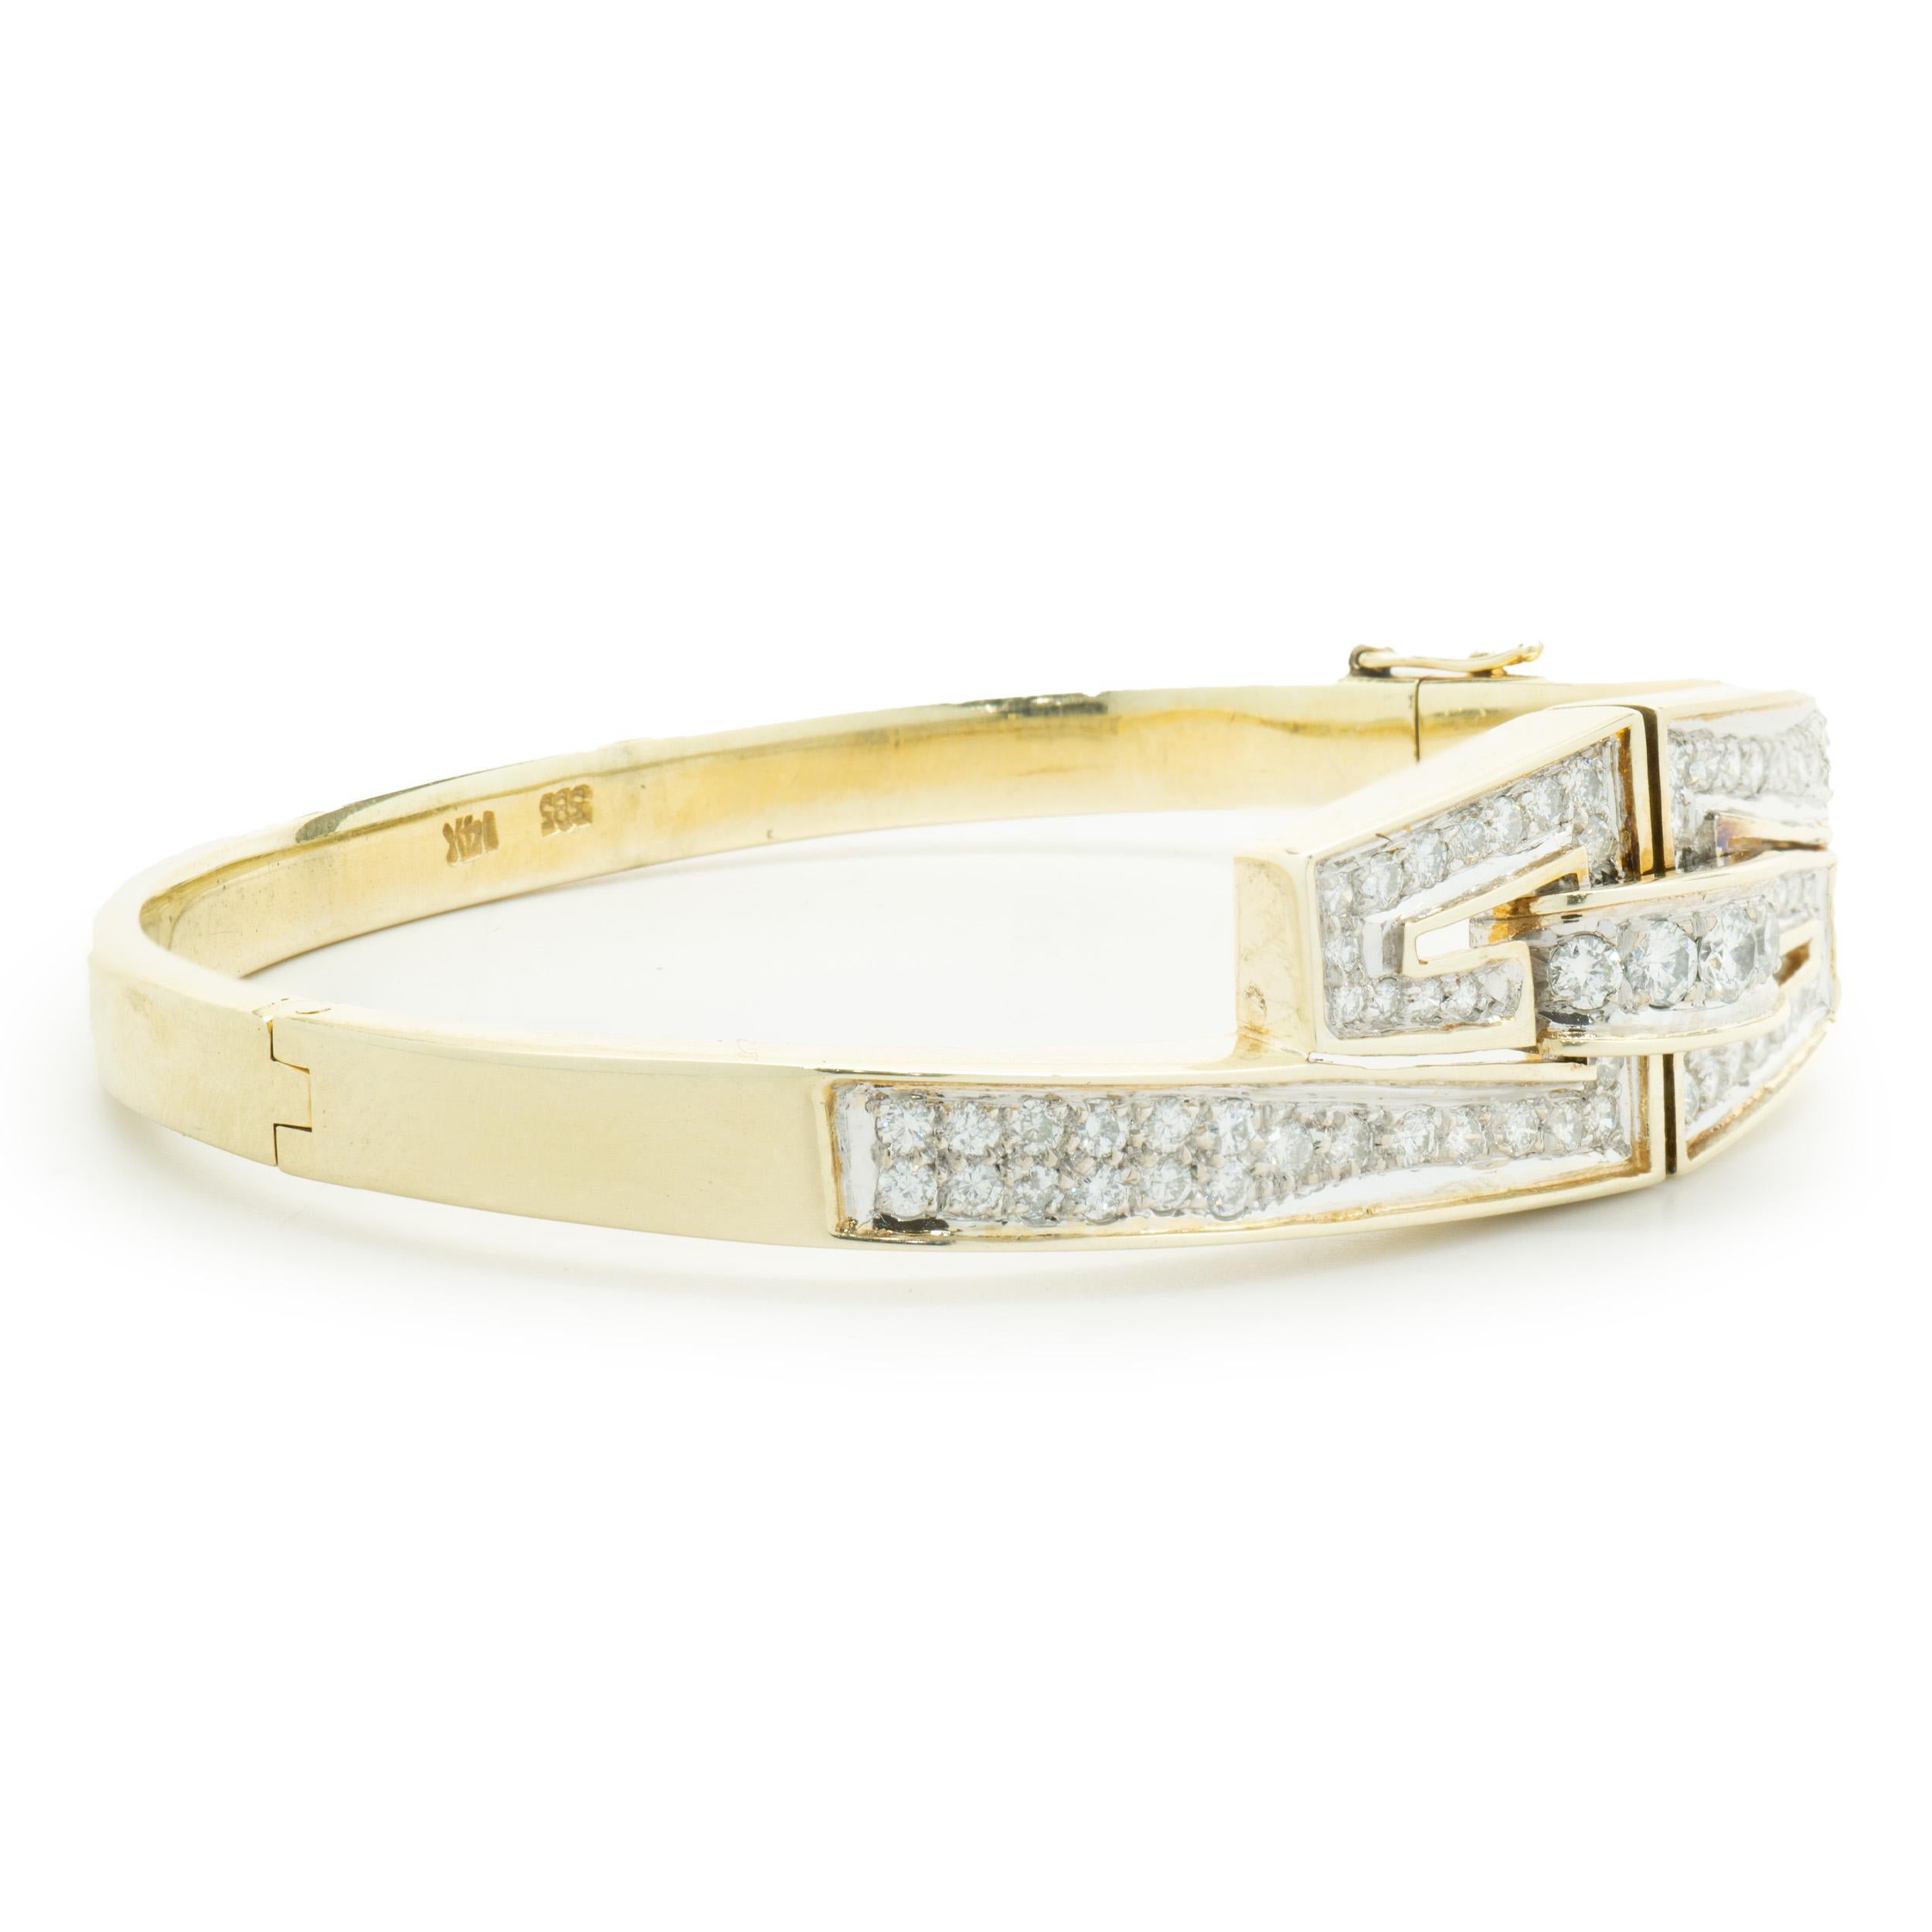 Designer: custom design
Material: 14K yellow gold
Diamonds: 71 round cut = 1.50cttw
Color: G 
Clarity: SI1-2
Dimensions: bracelet measures 7-inches in diameter 
Weight: 26.26 grams